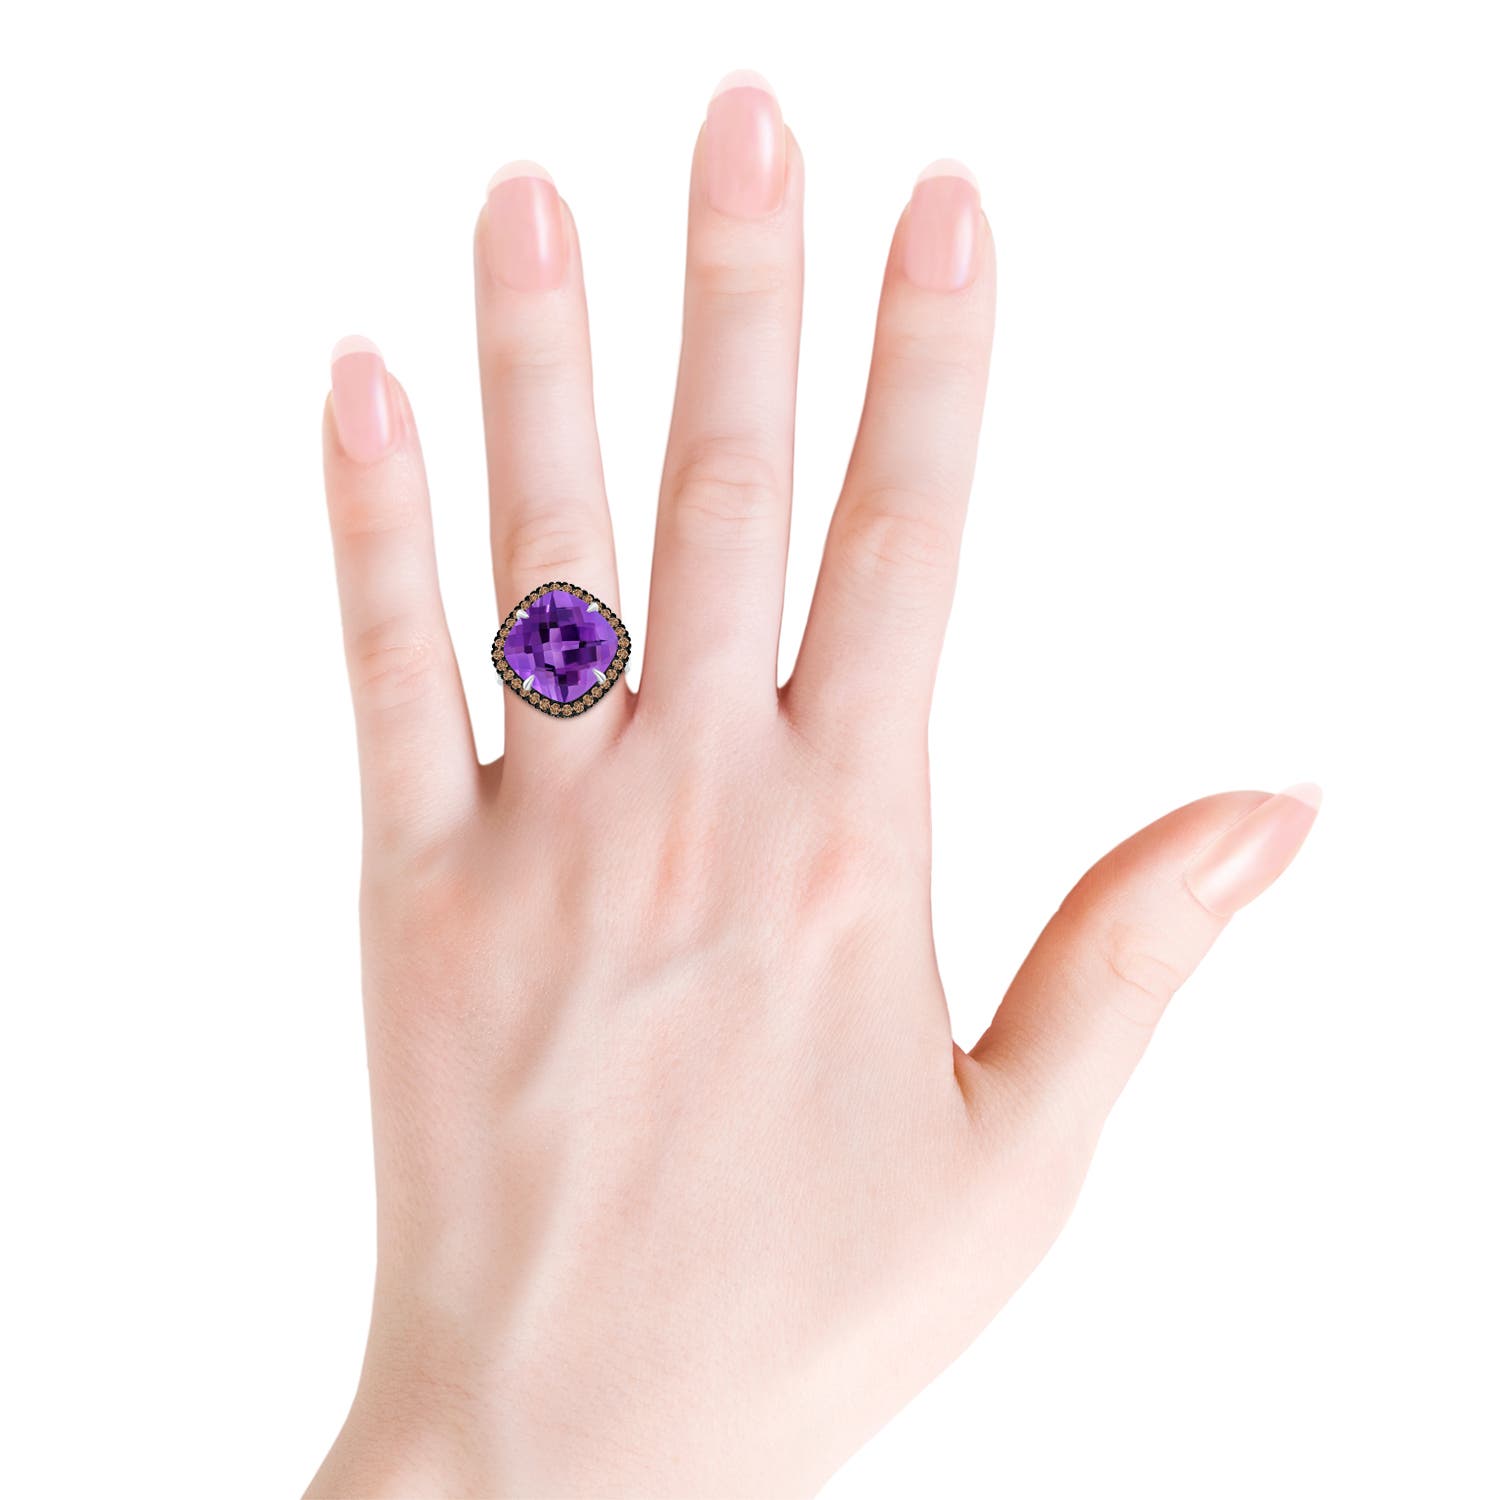 AAA - Amethyst / 8.38 CT / 14 KT White Gold